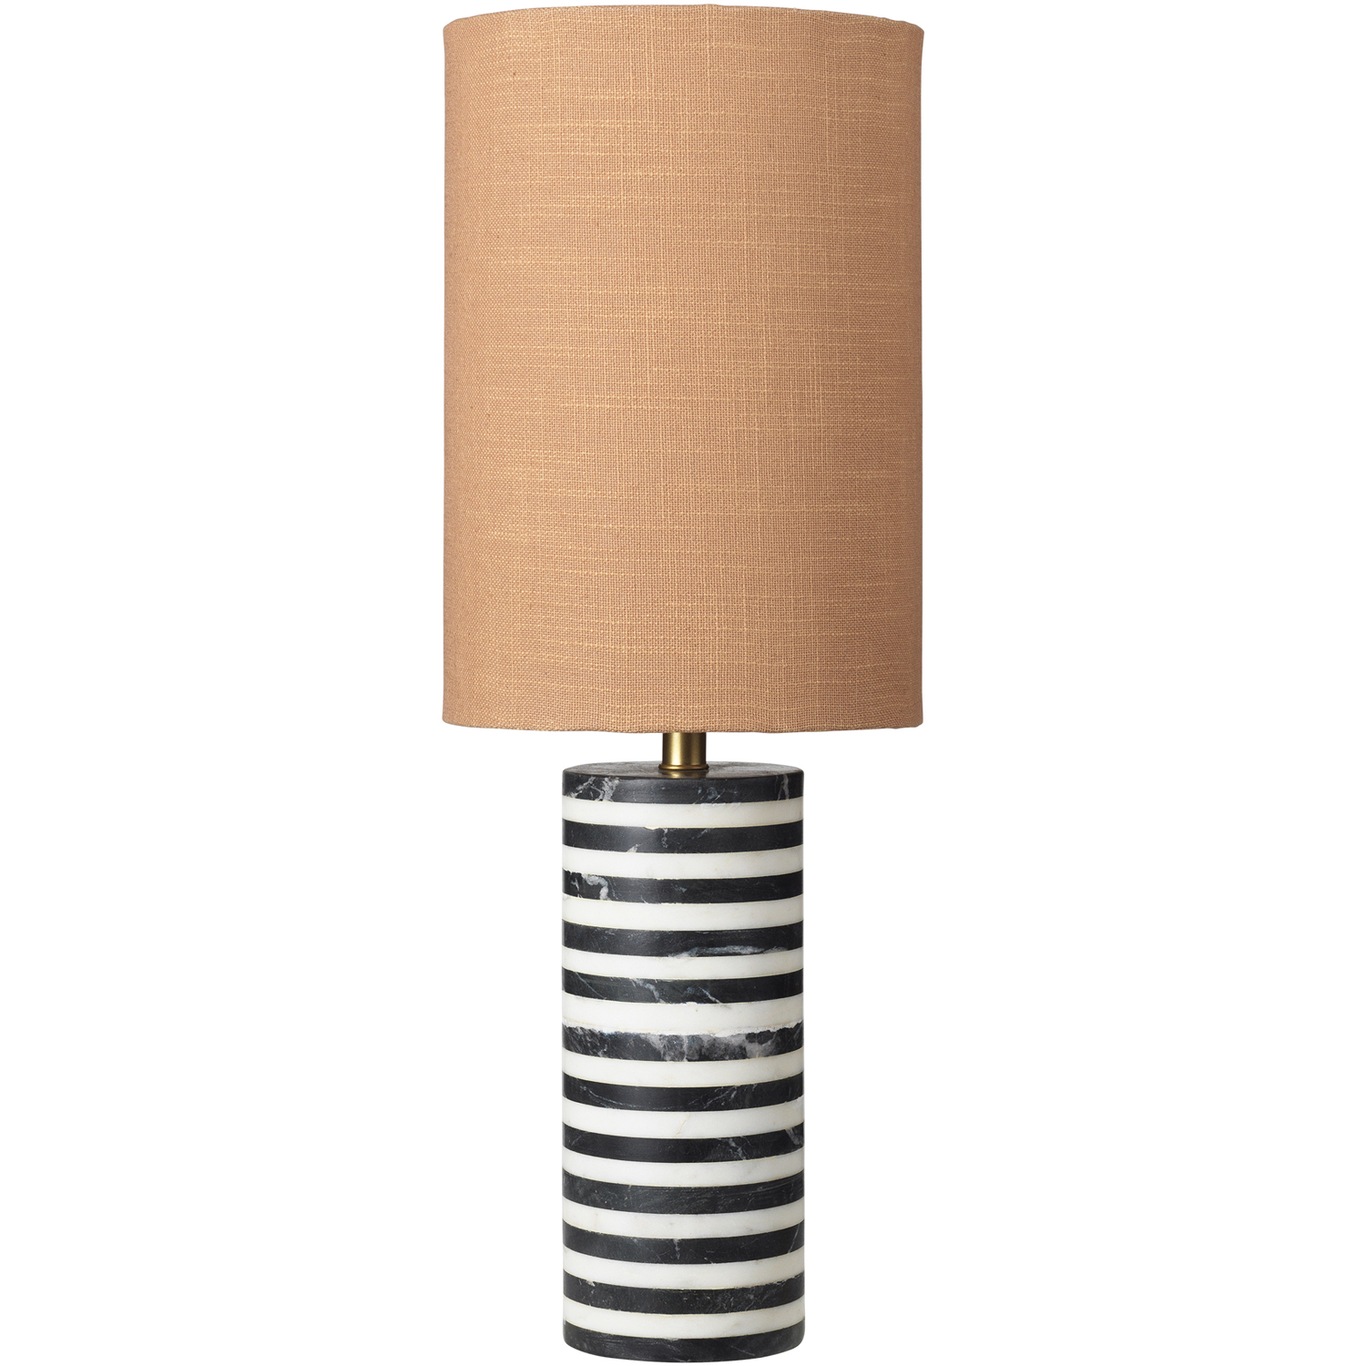 Cleo Stribed Table Lamp, Caramel